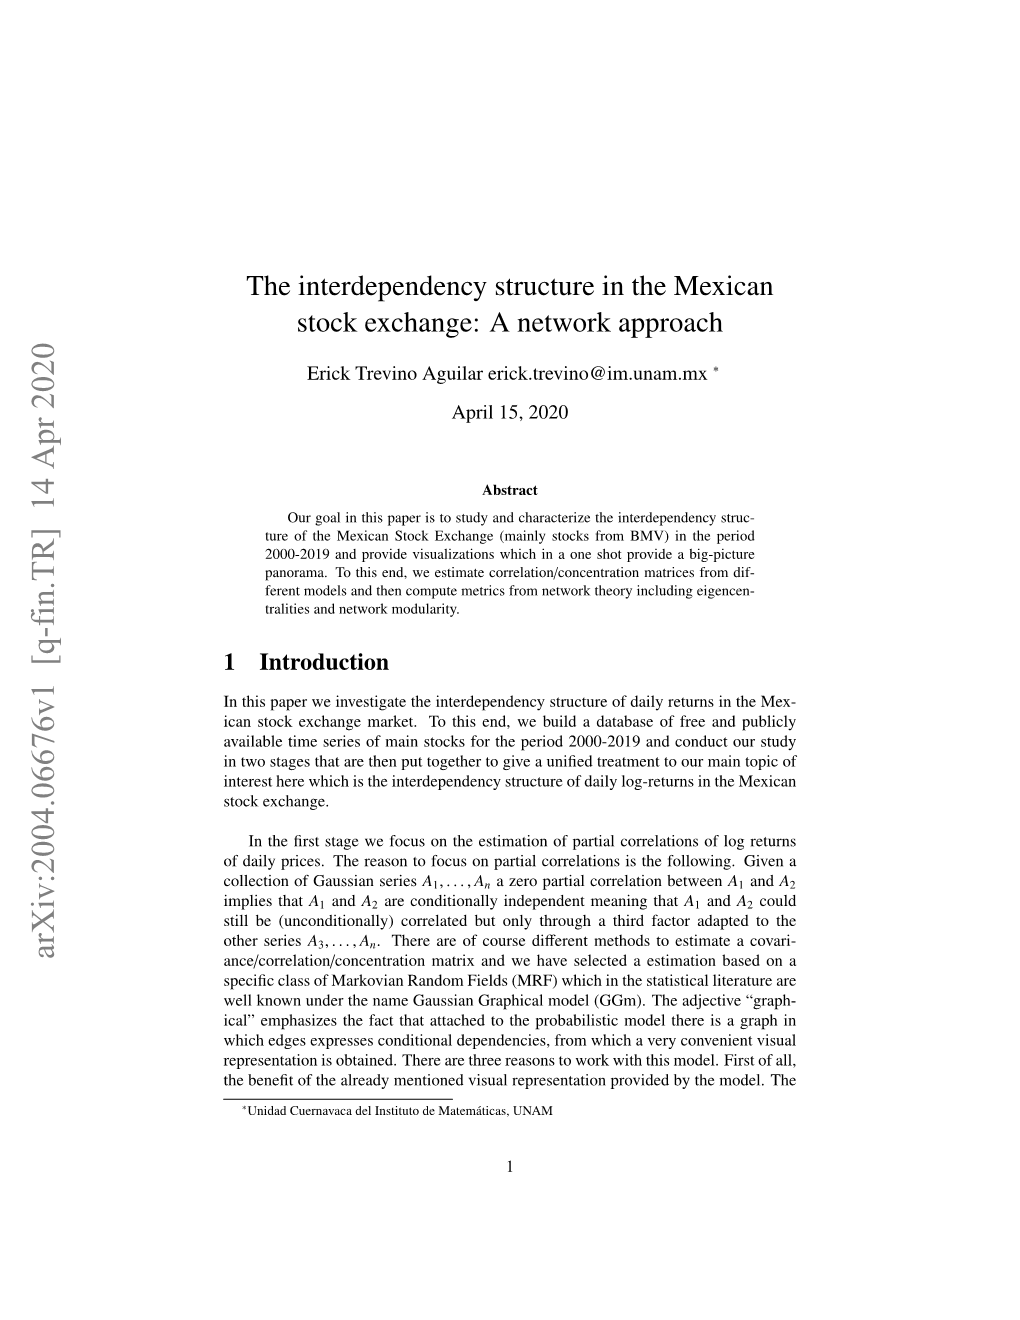 The Interdependency Structure in the Mexican Stock Exchange: a Network Approach